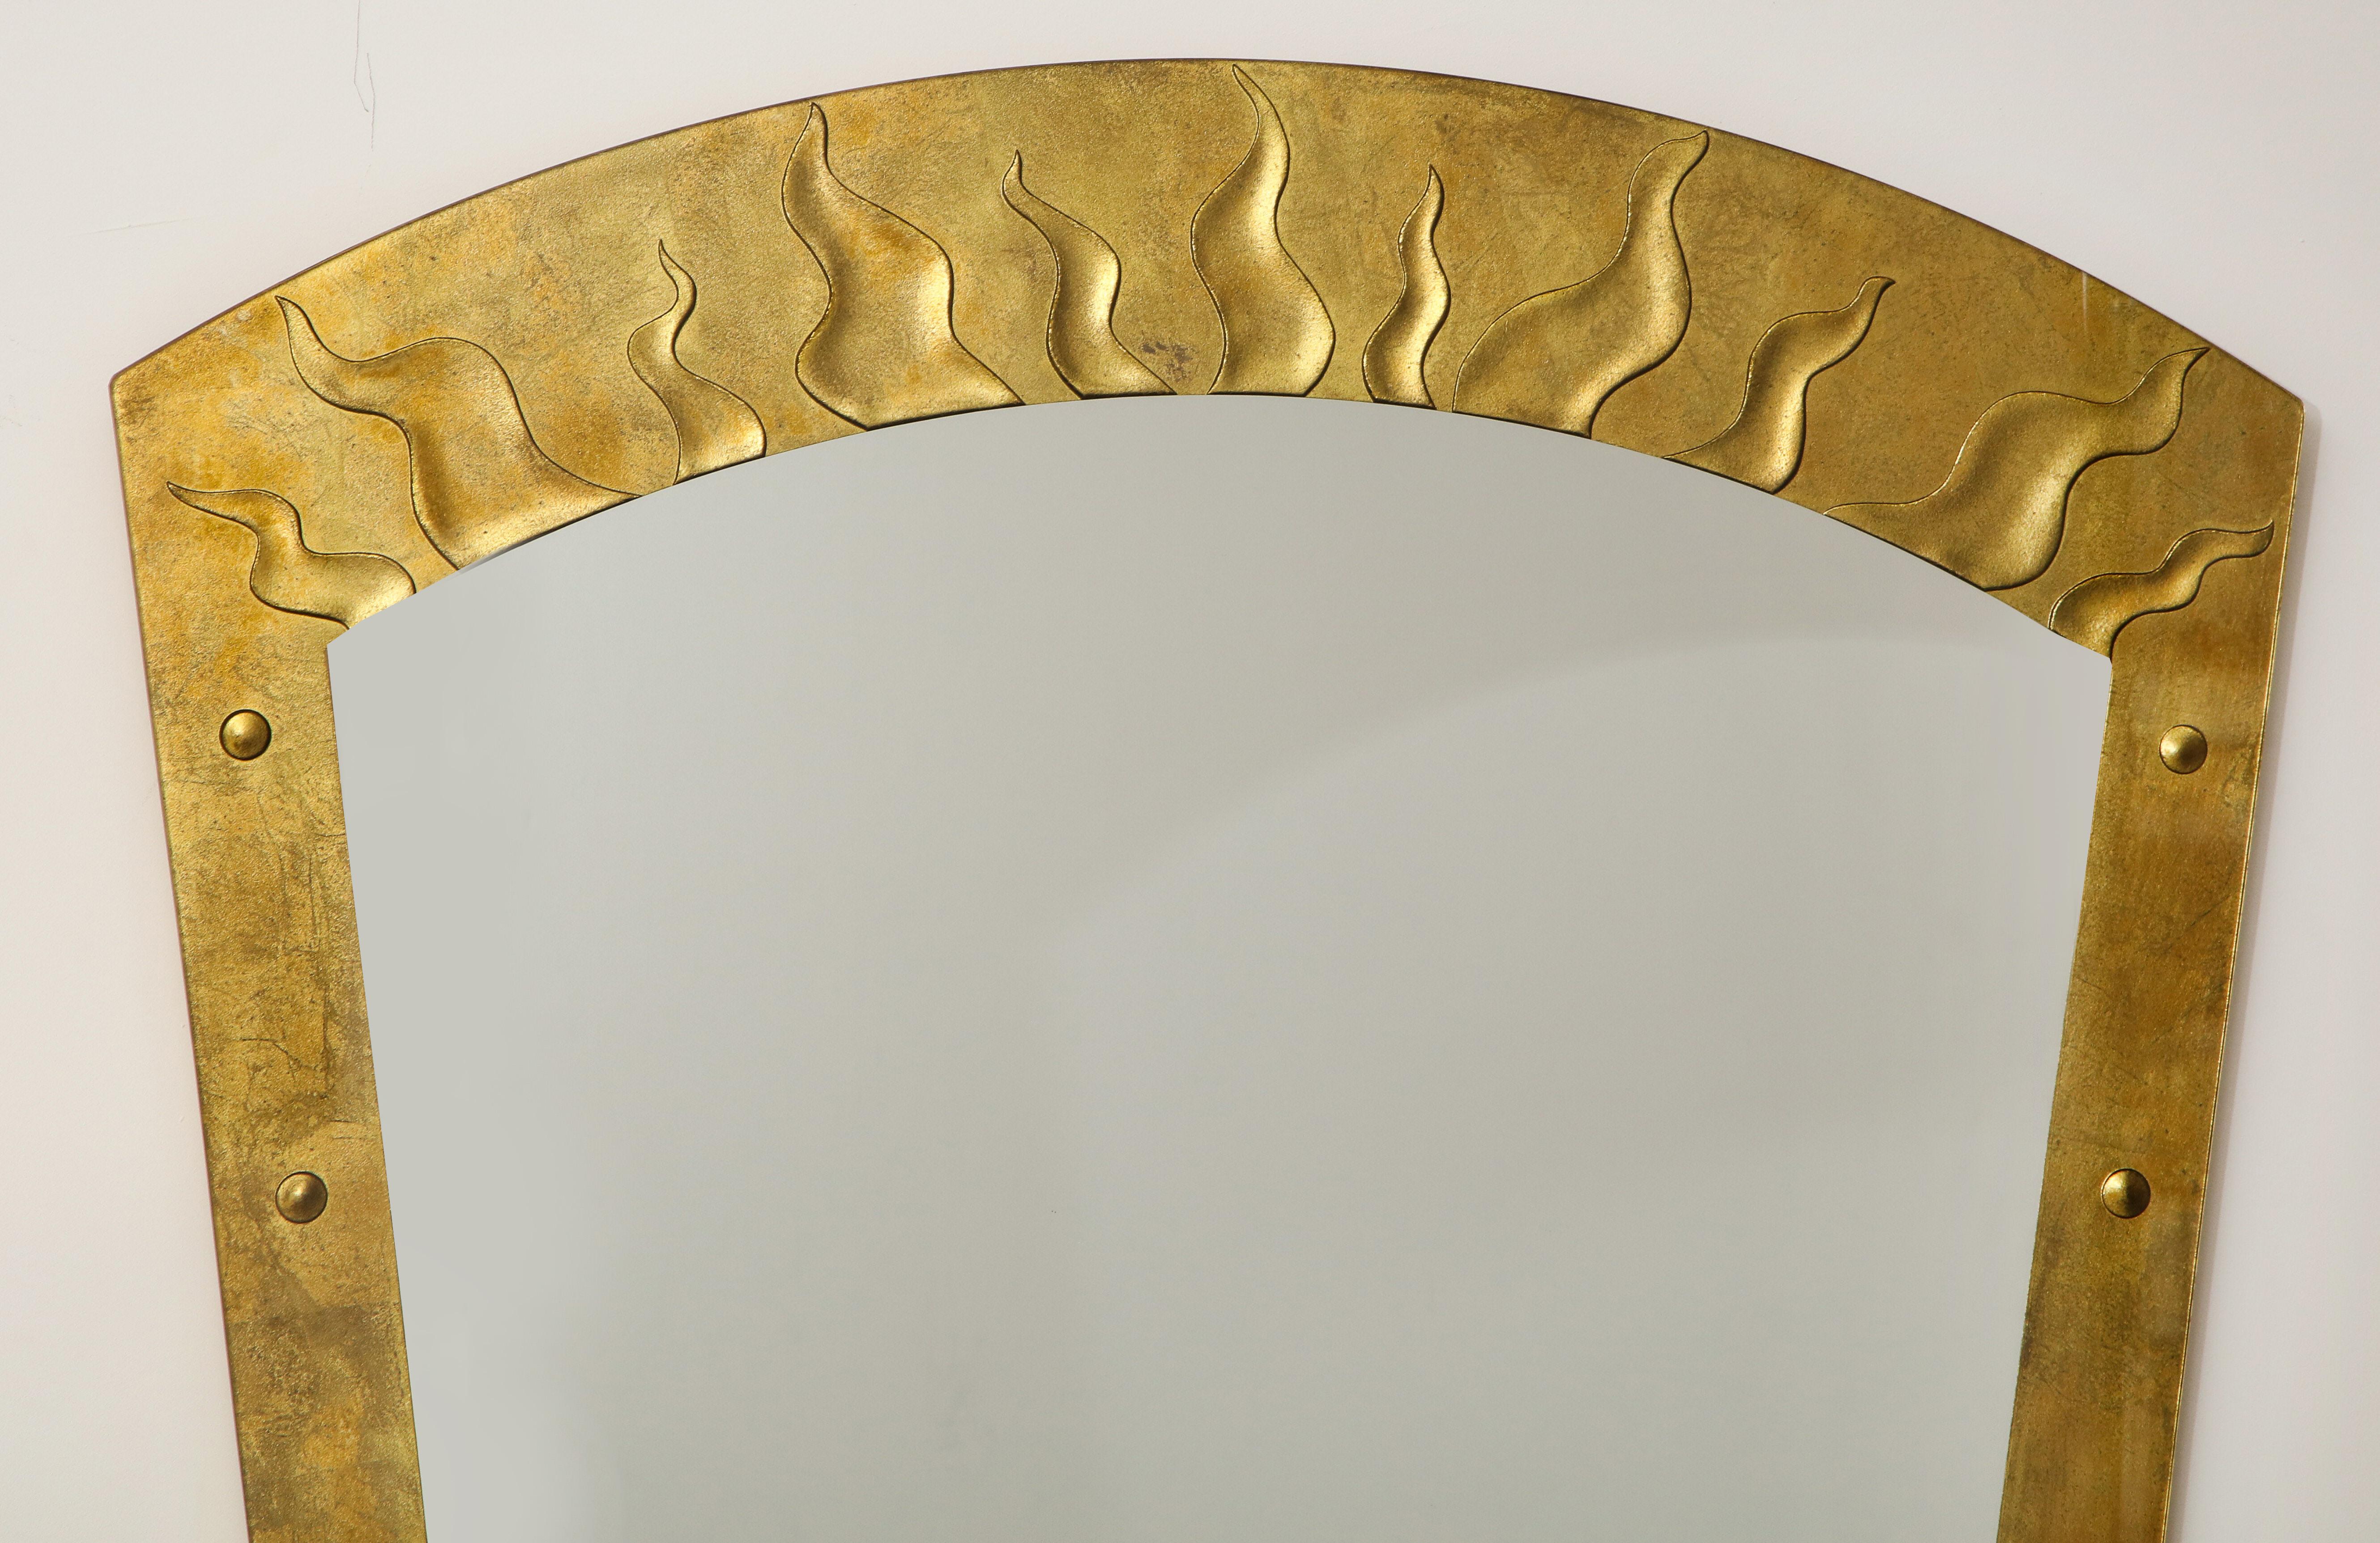 1980's Èglomisé gold leaf mirror by David Marshall with flame pattern, in good vintage original condition with minor wear and patina due to age and use.